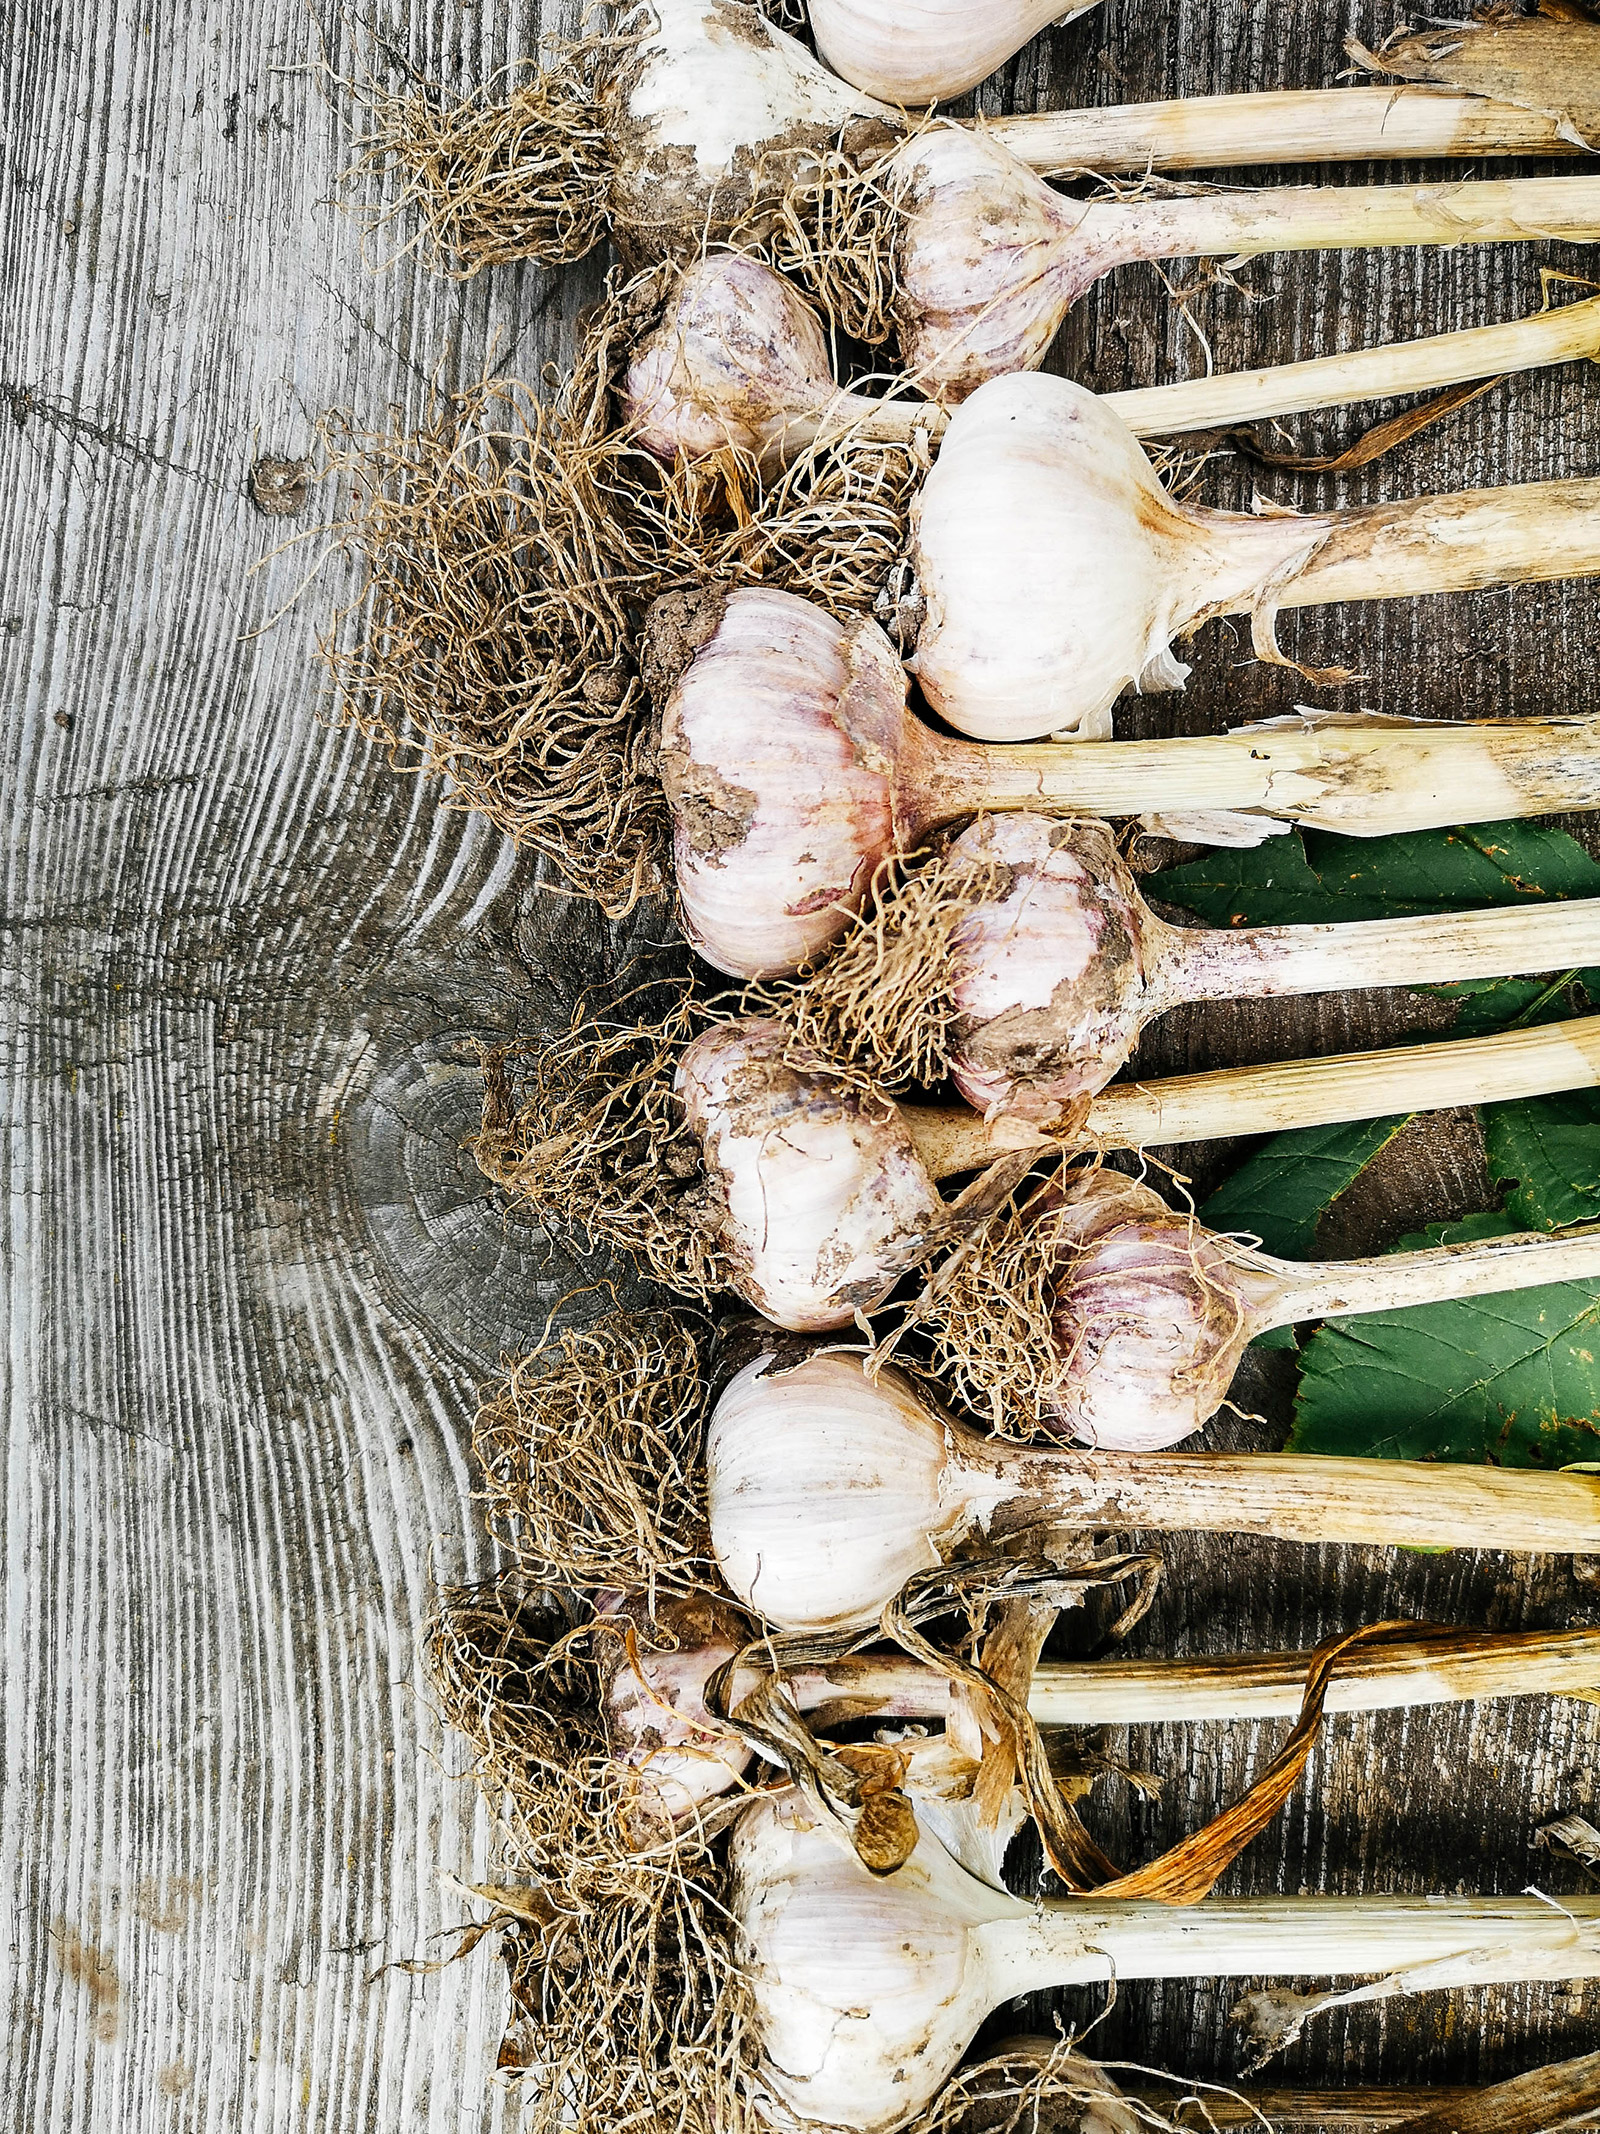 Hardneck garlic bulbs curing on a wooden surface